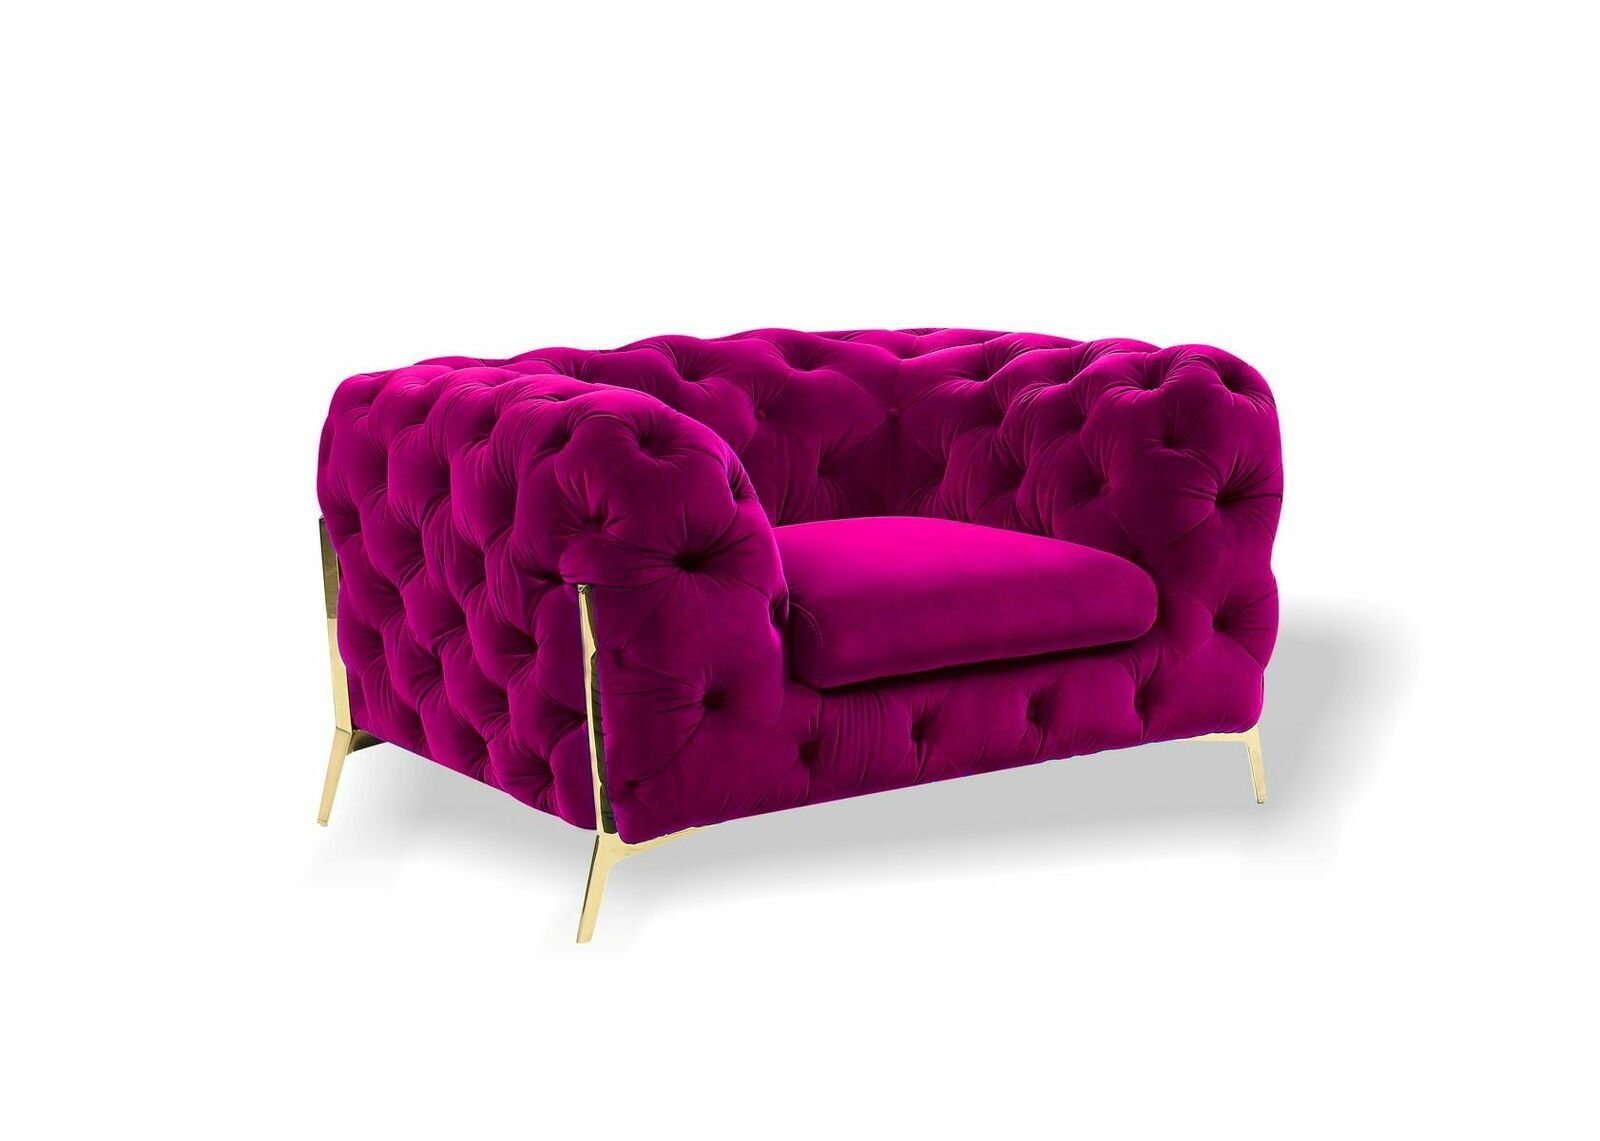 JVmoebel Ohrensessel Lila Chesterfield Polster Couch 1 Couch Sofa in (Sessel), Europe Sessel Sitzer Ohrensessel Made